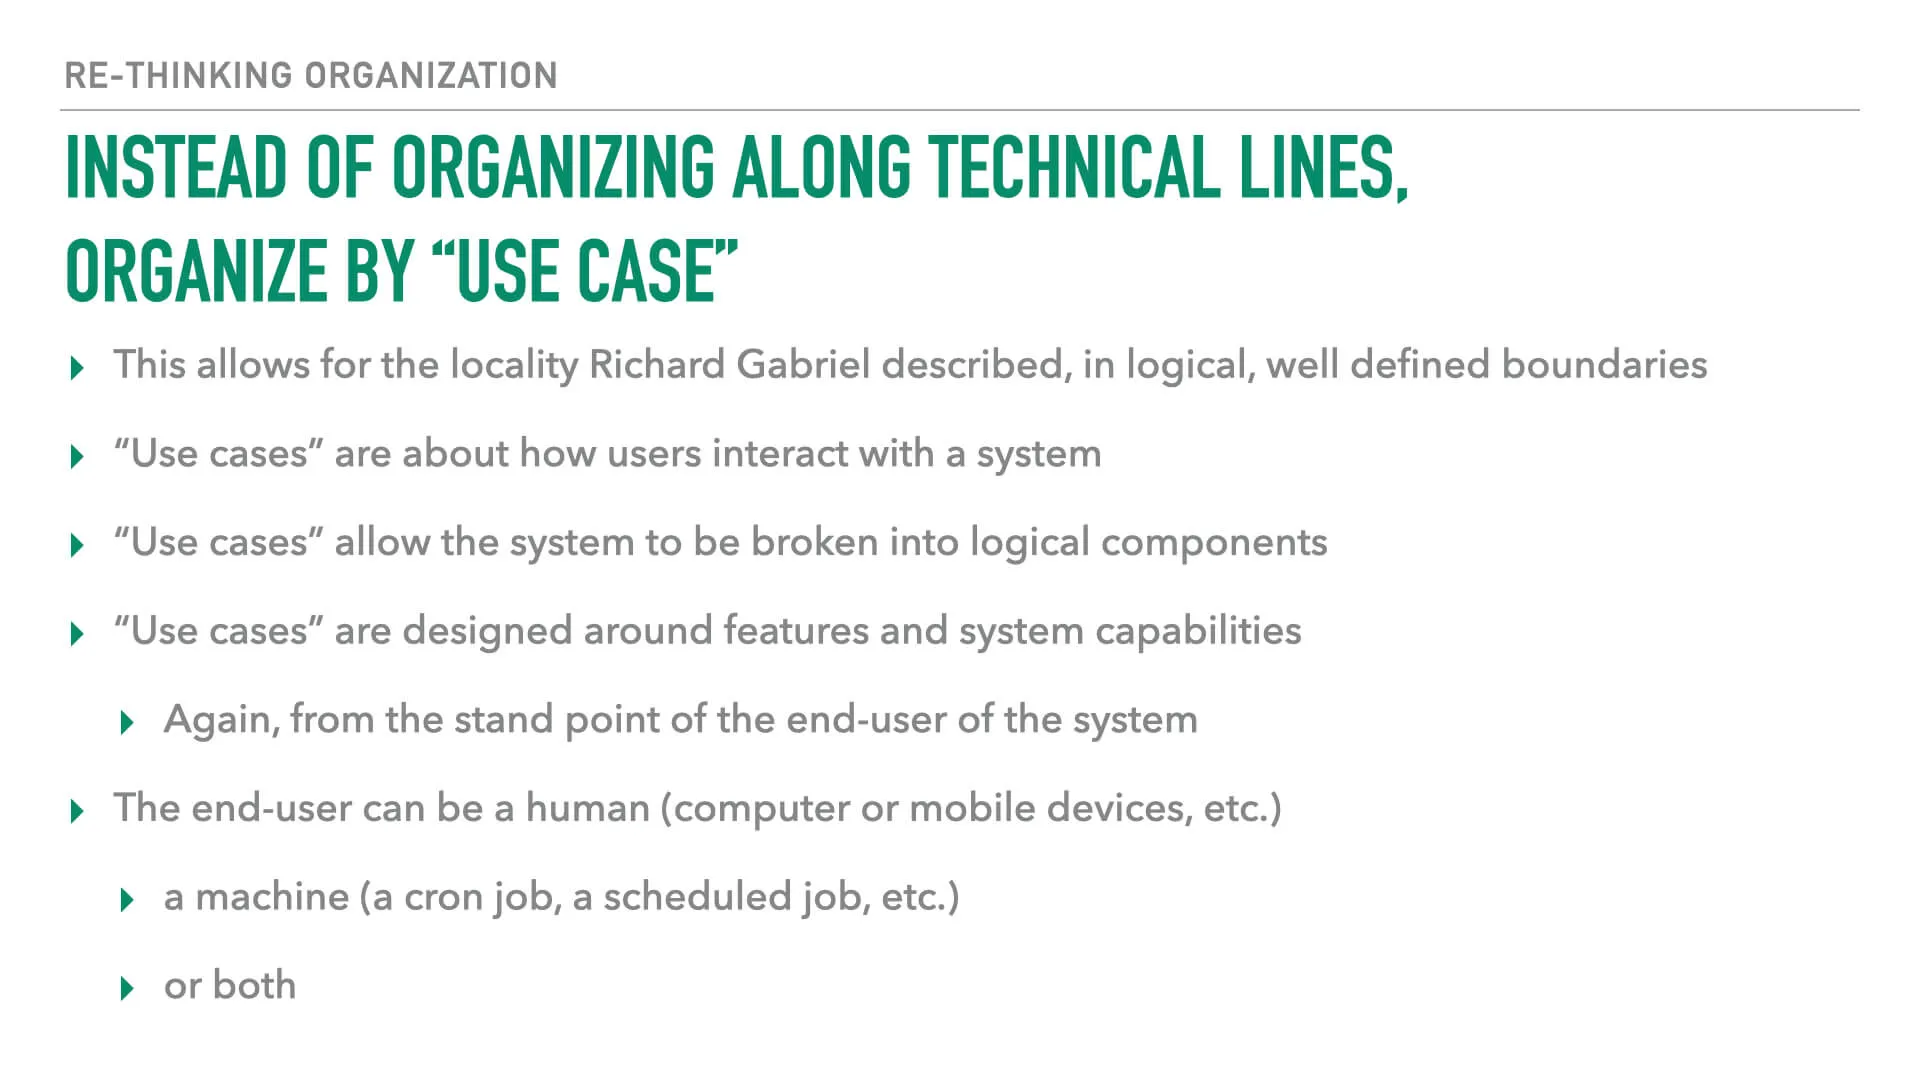 A slide for organizing by use case rather than along technical lines